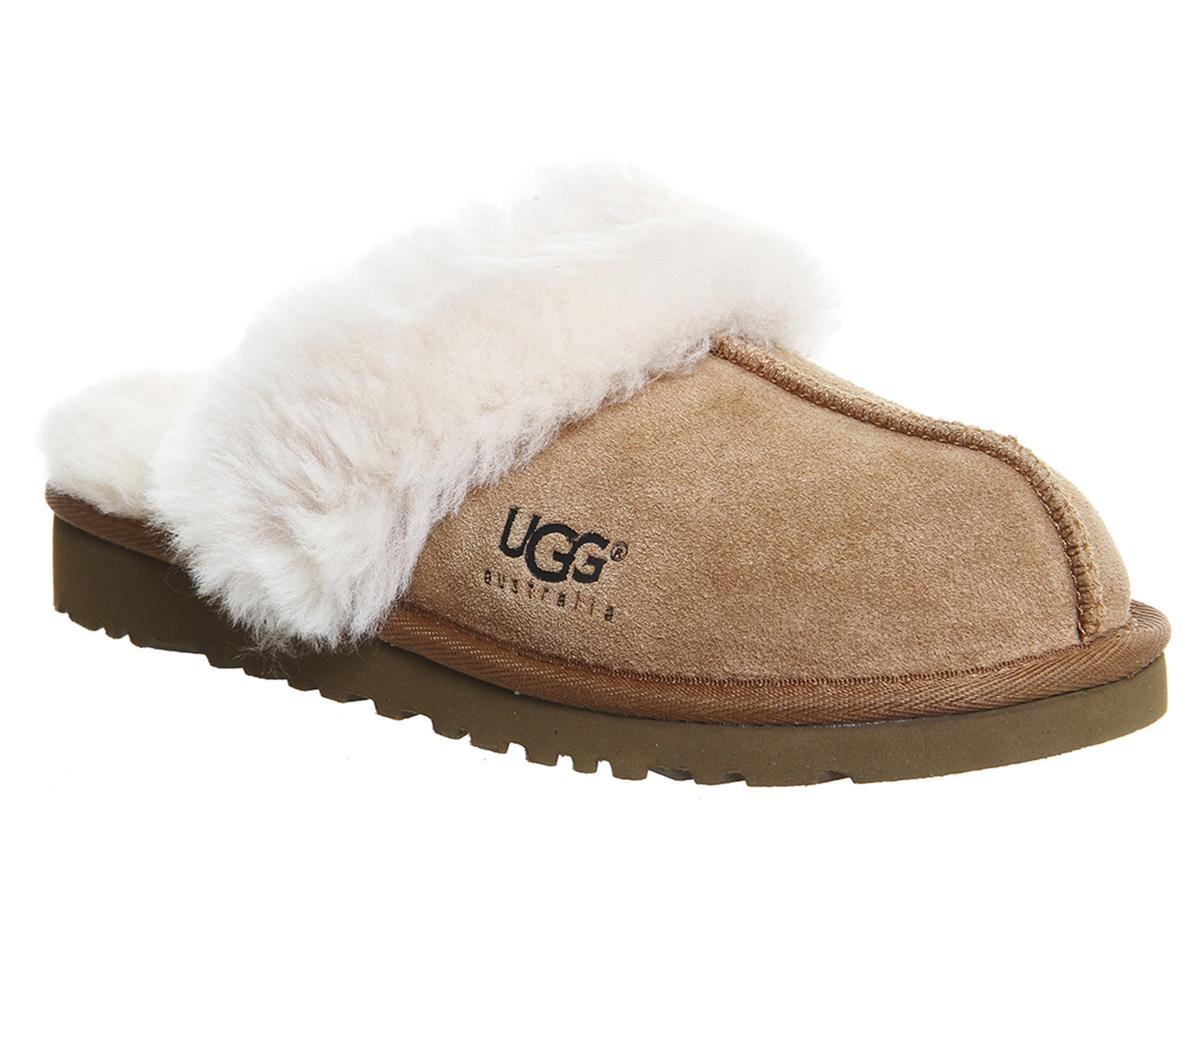 ugg slippers size 5.5